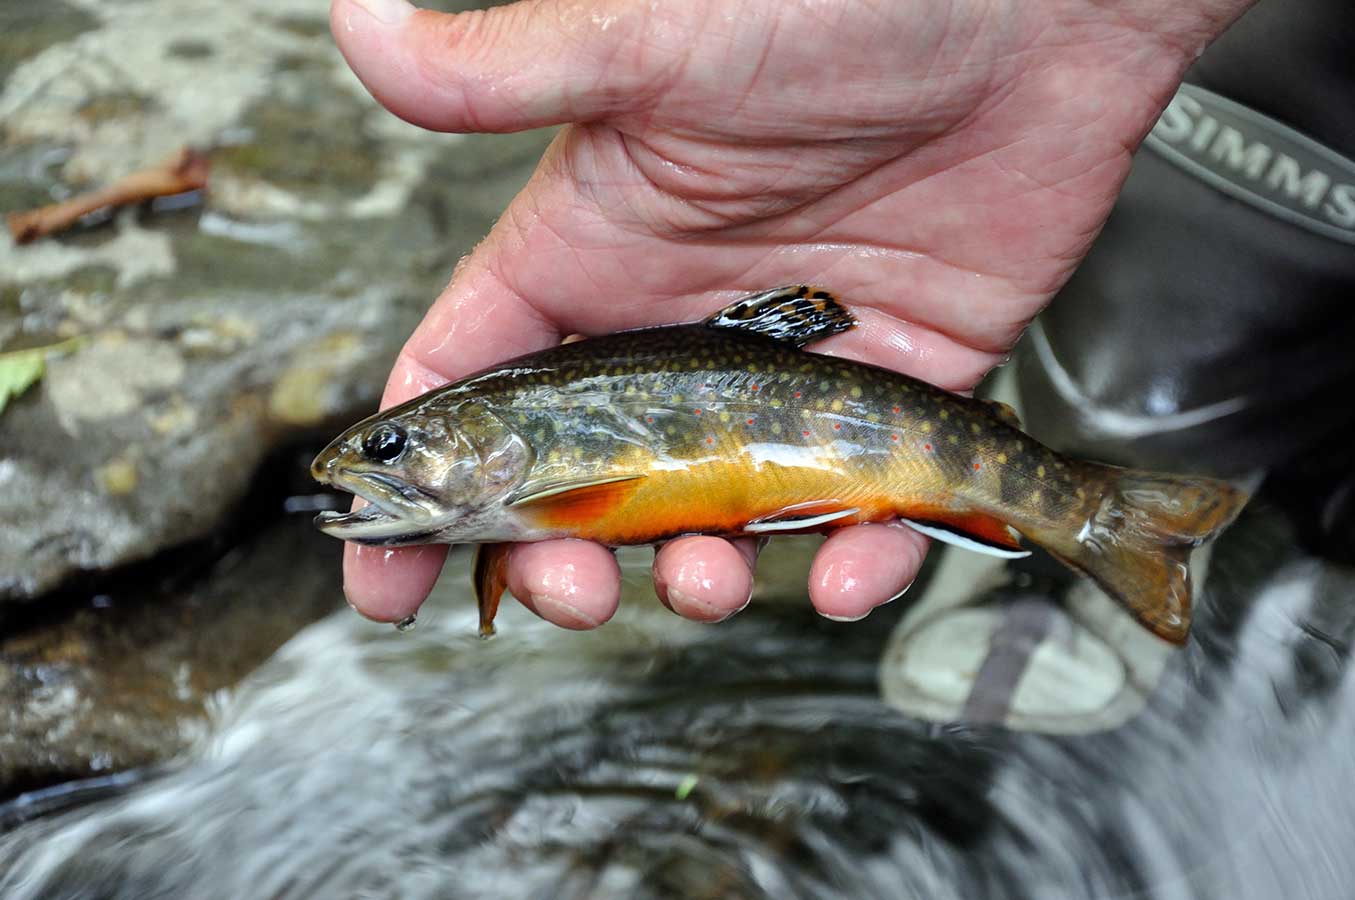 http://midcurrent.com/wp-content/uploads/2019/06/Native-Southern-Appalachian-Brook-Trout-Great-Smoky-Mountain-Natuonal-Park.jpg